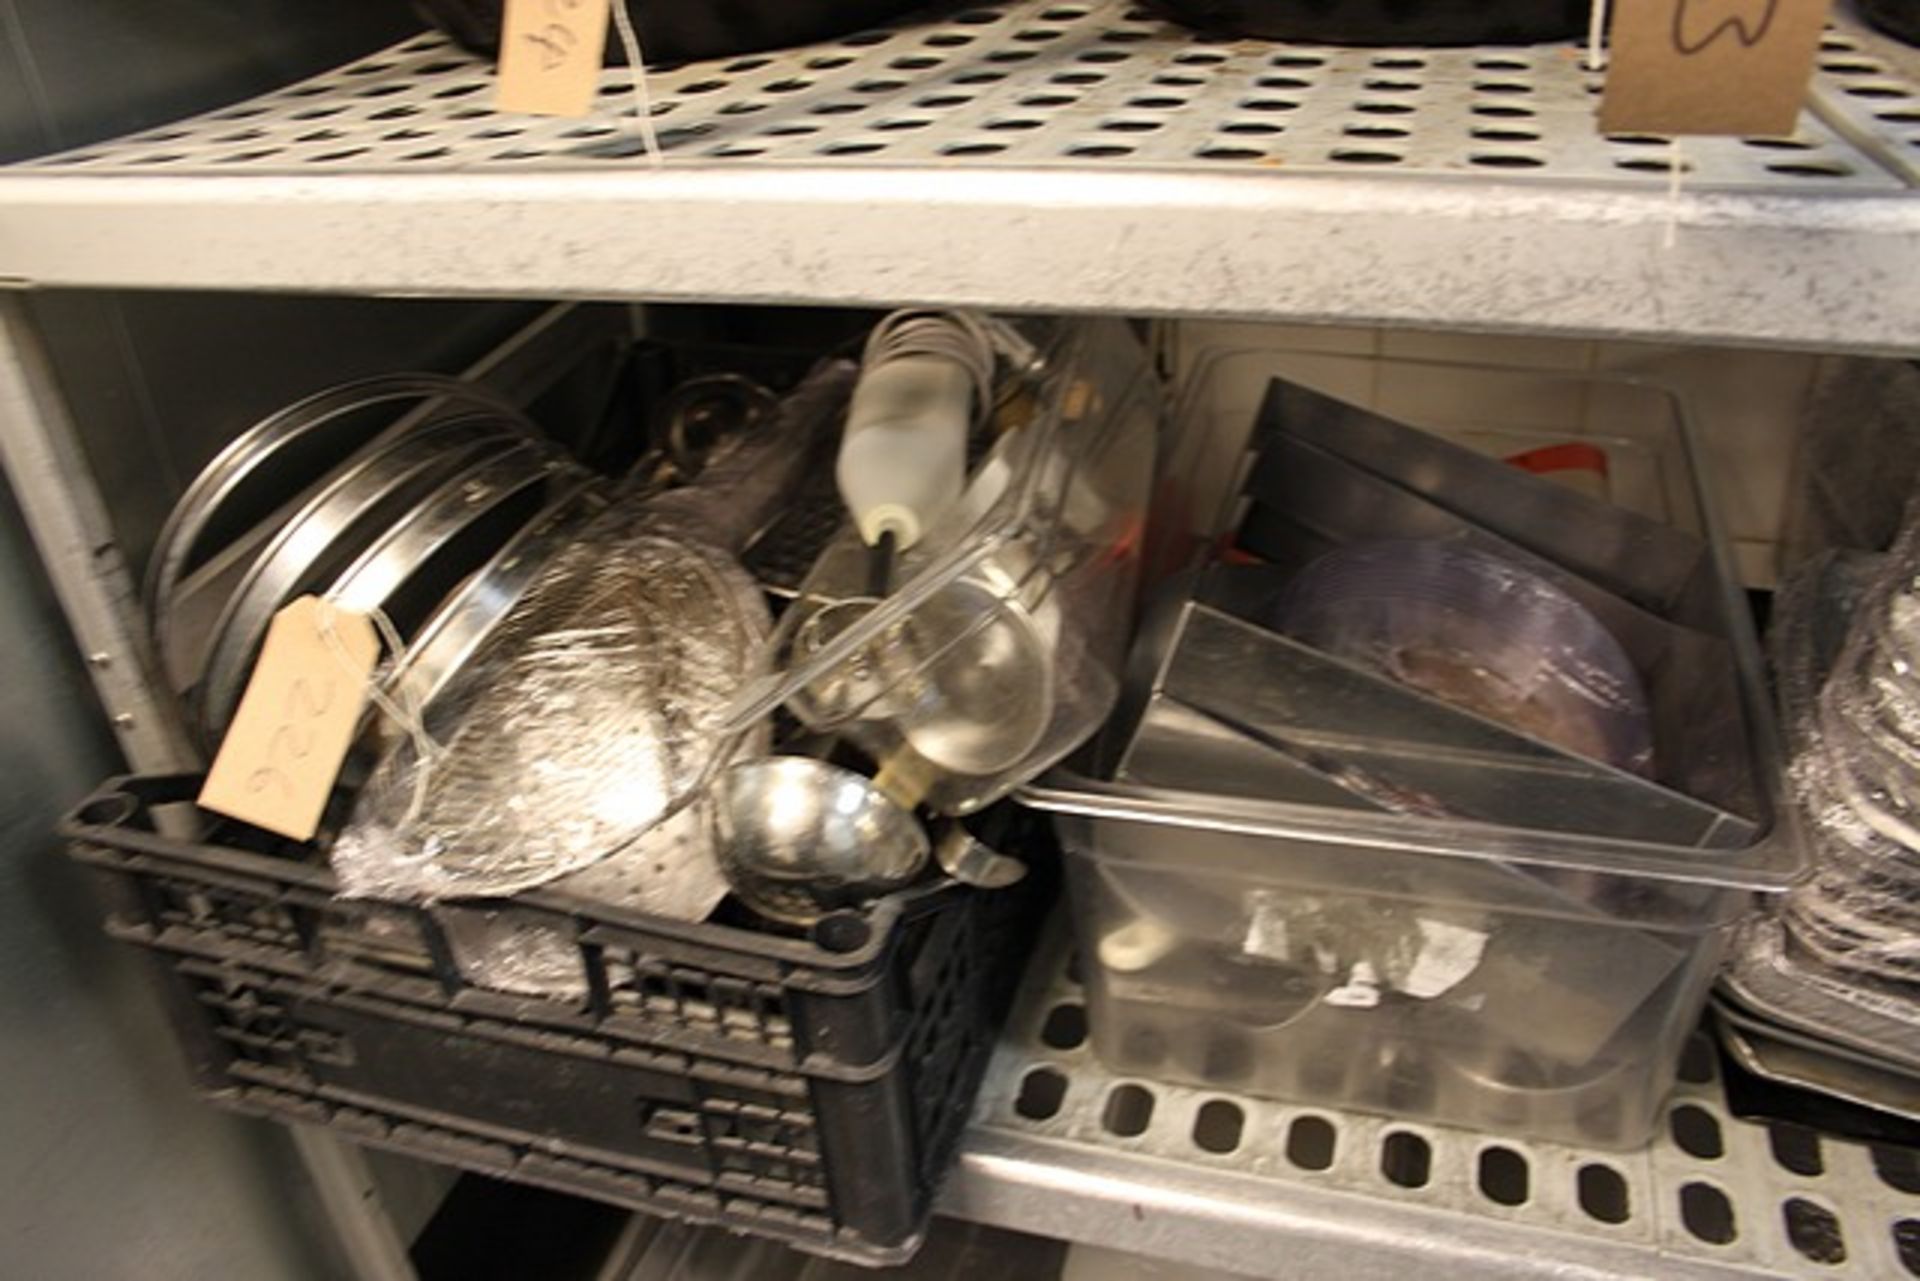 A large quantity of various kitchen chef utensils as lotted - ladles, scoops, cake rings etc.